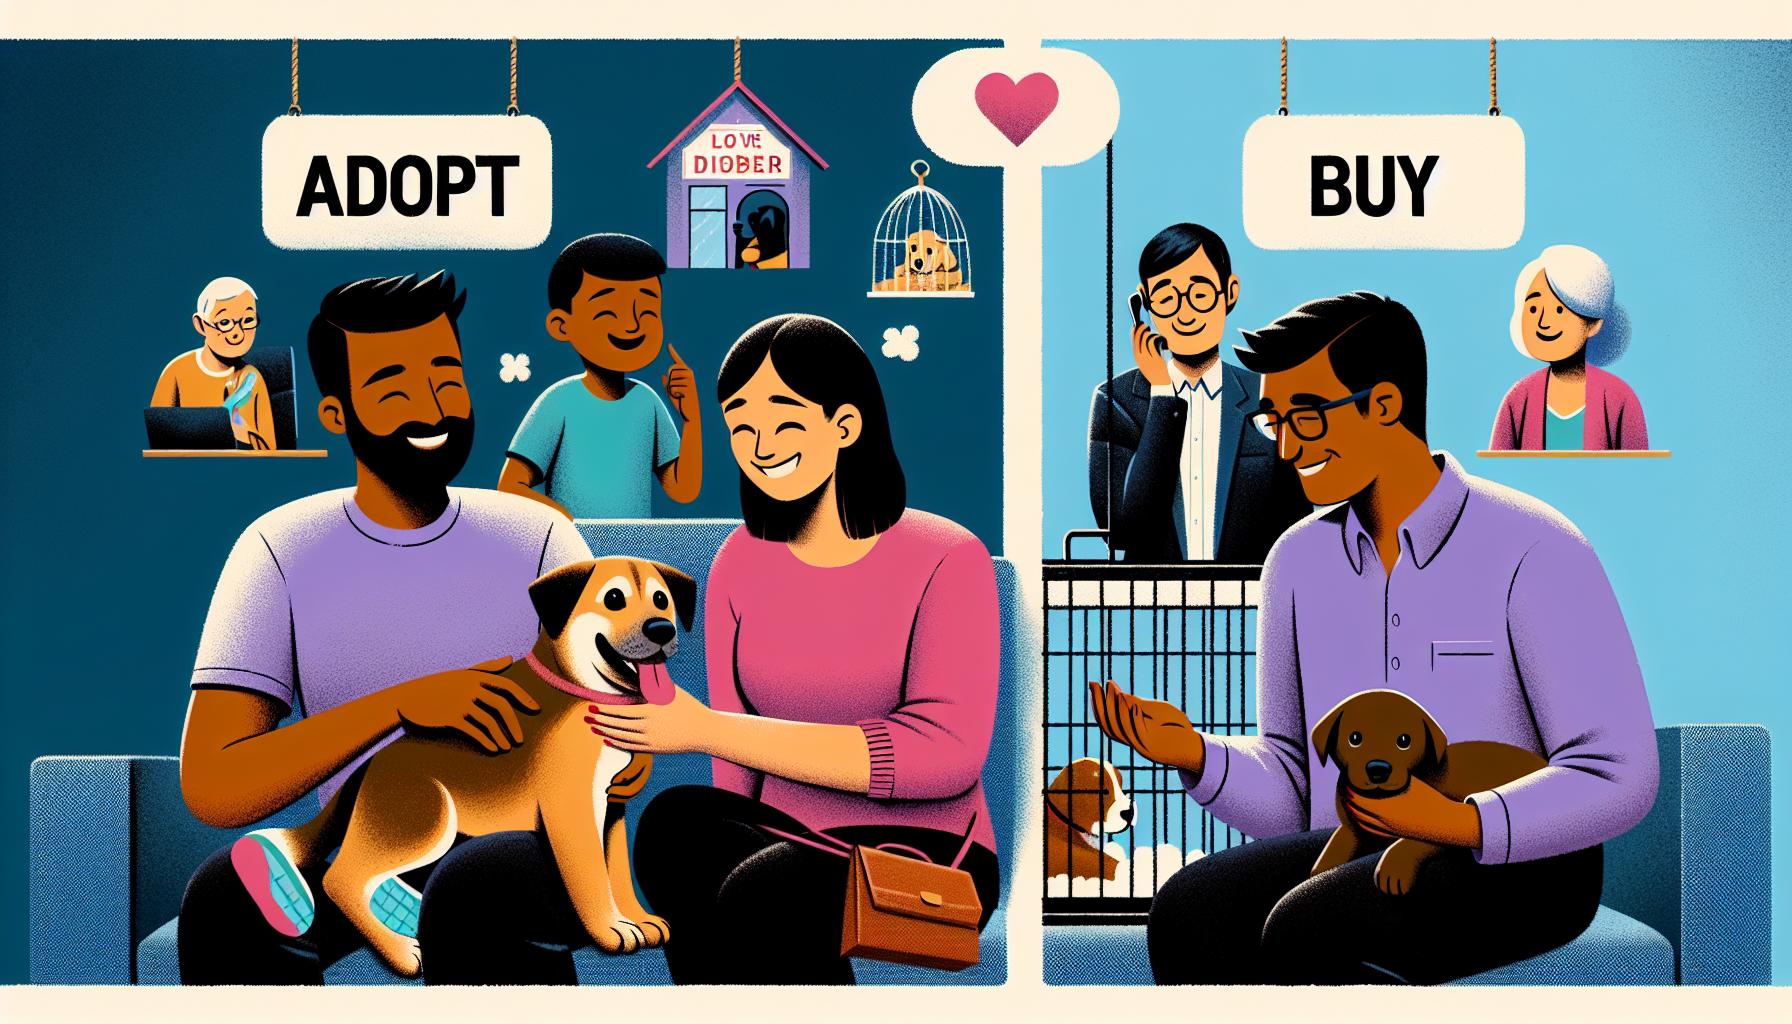 adopting vs buying a dog - which one is better for you